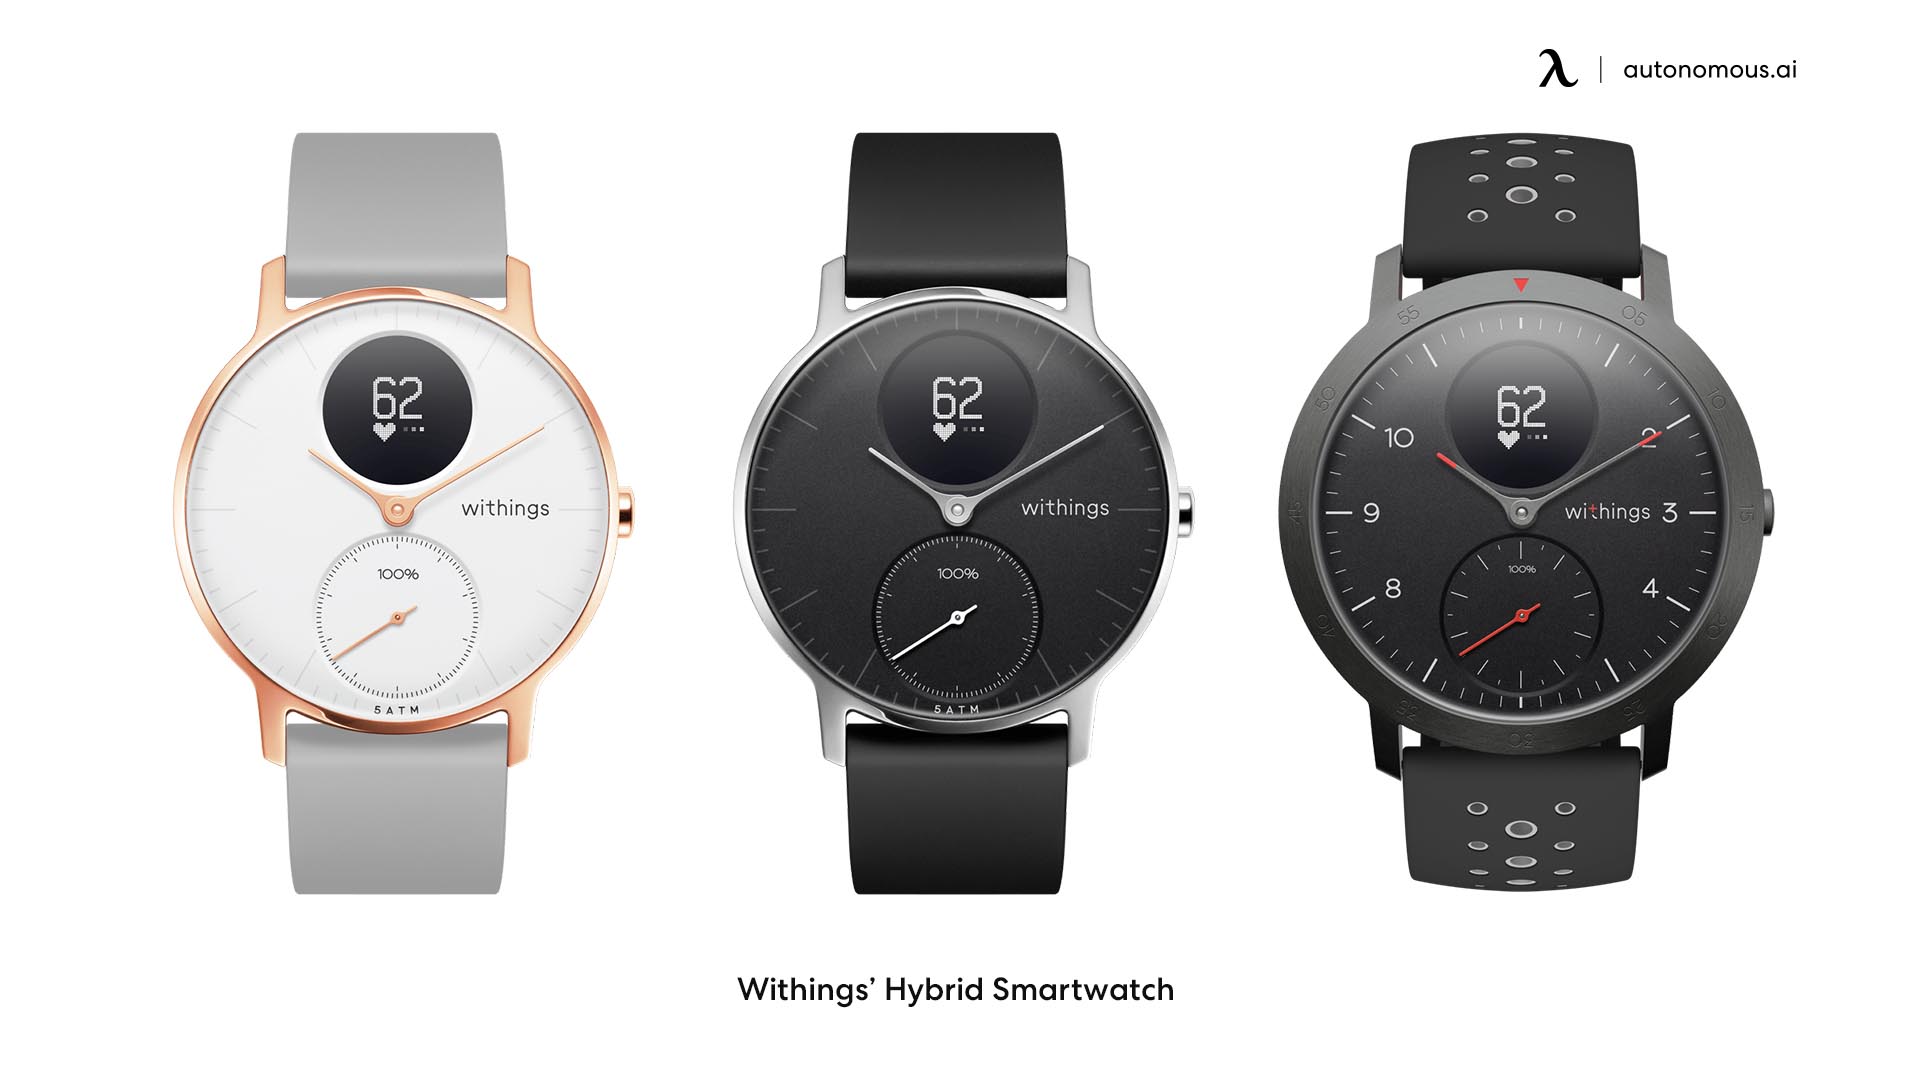 Withings’ Hybrid Smartwatch